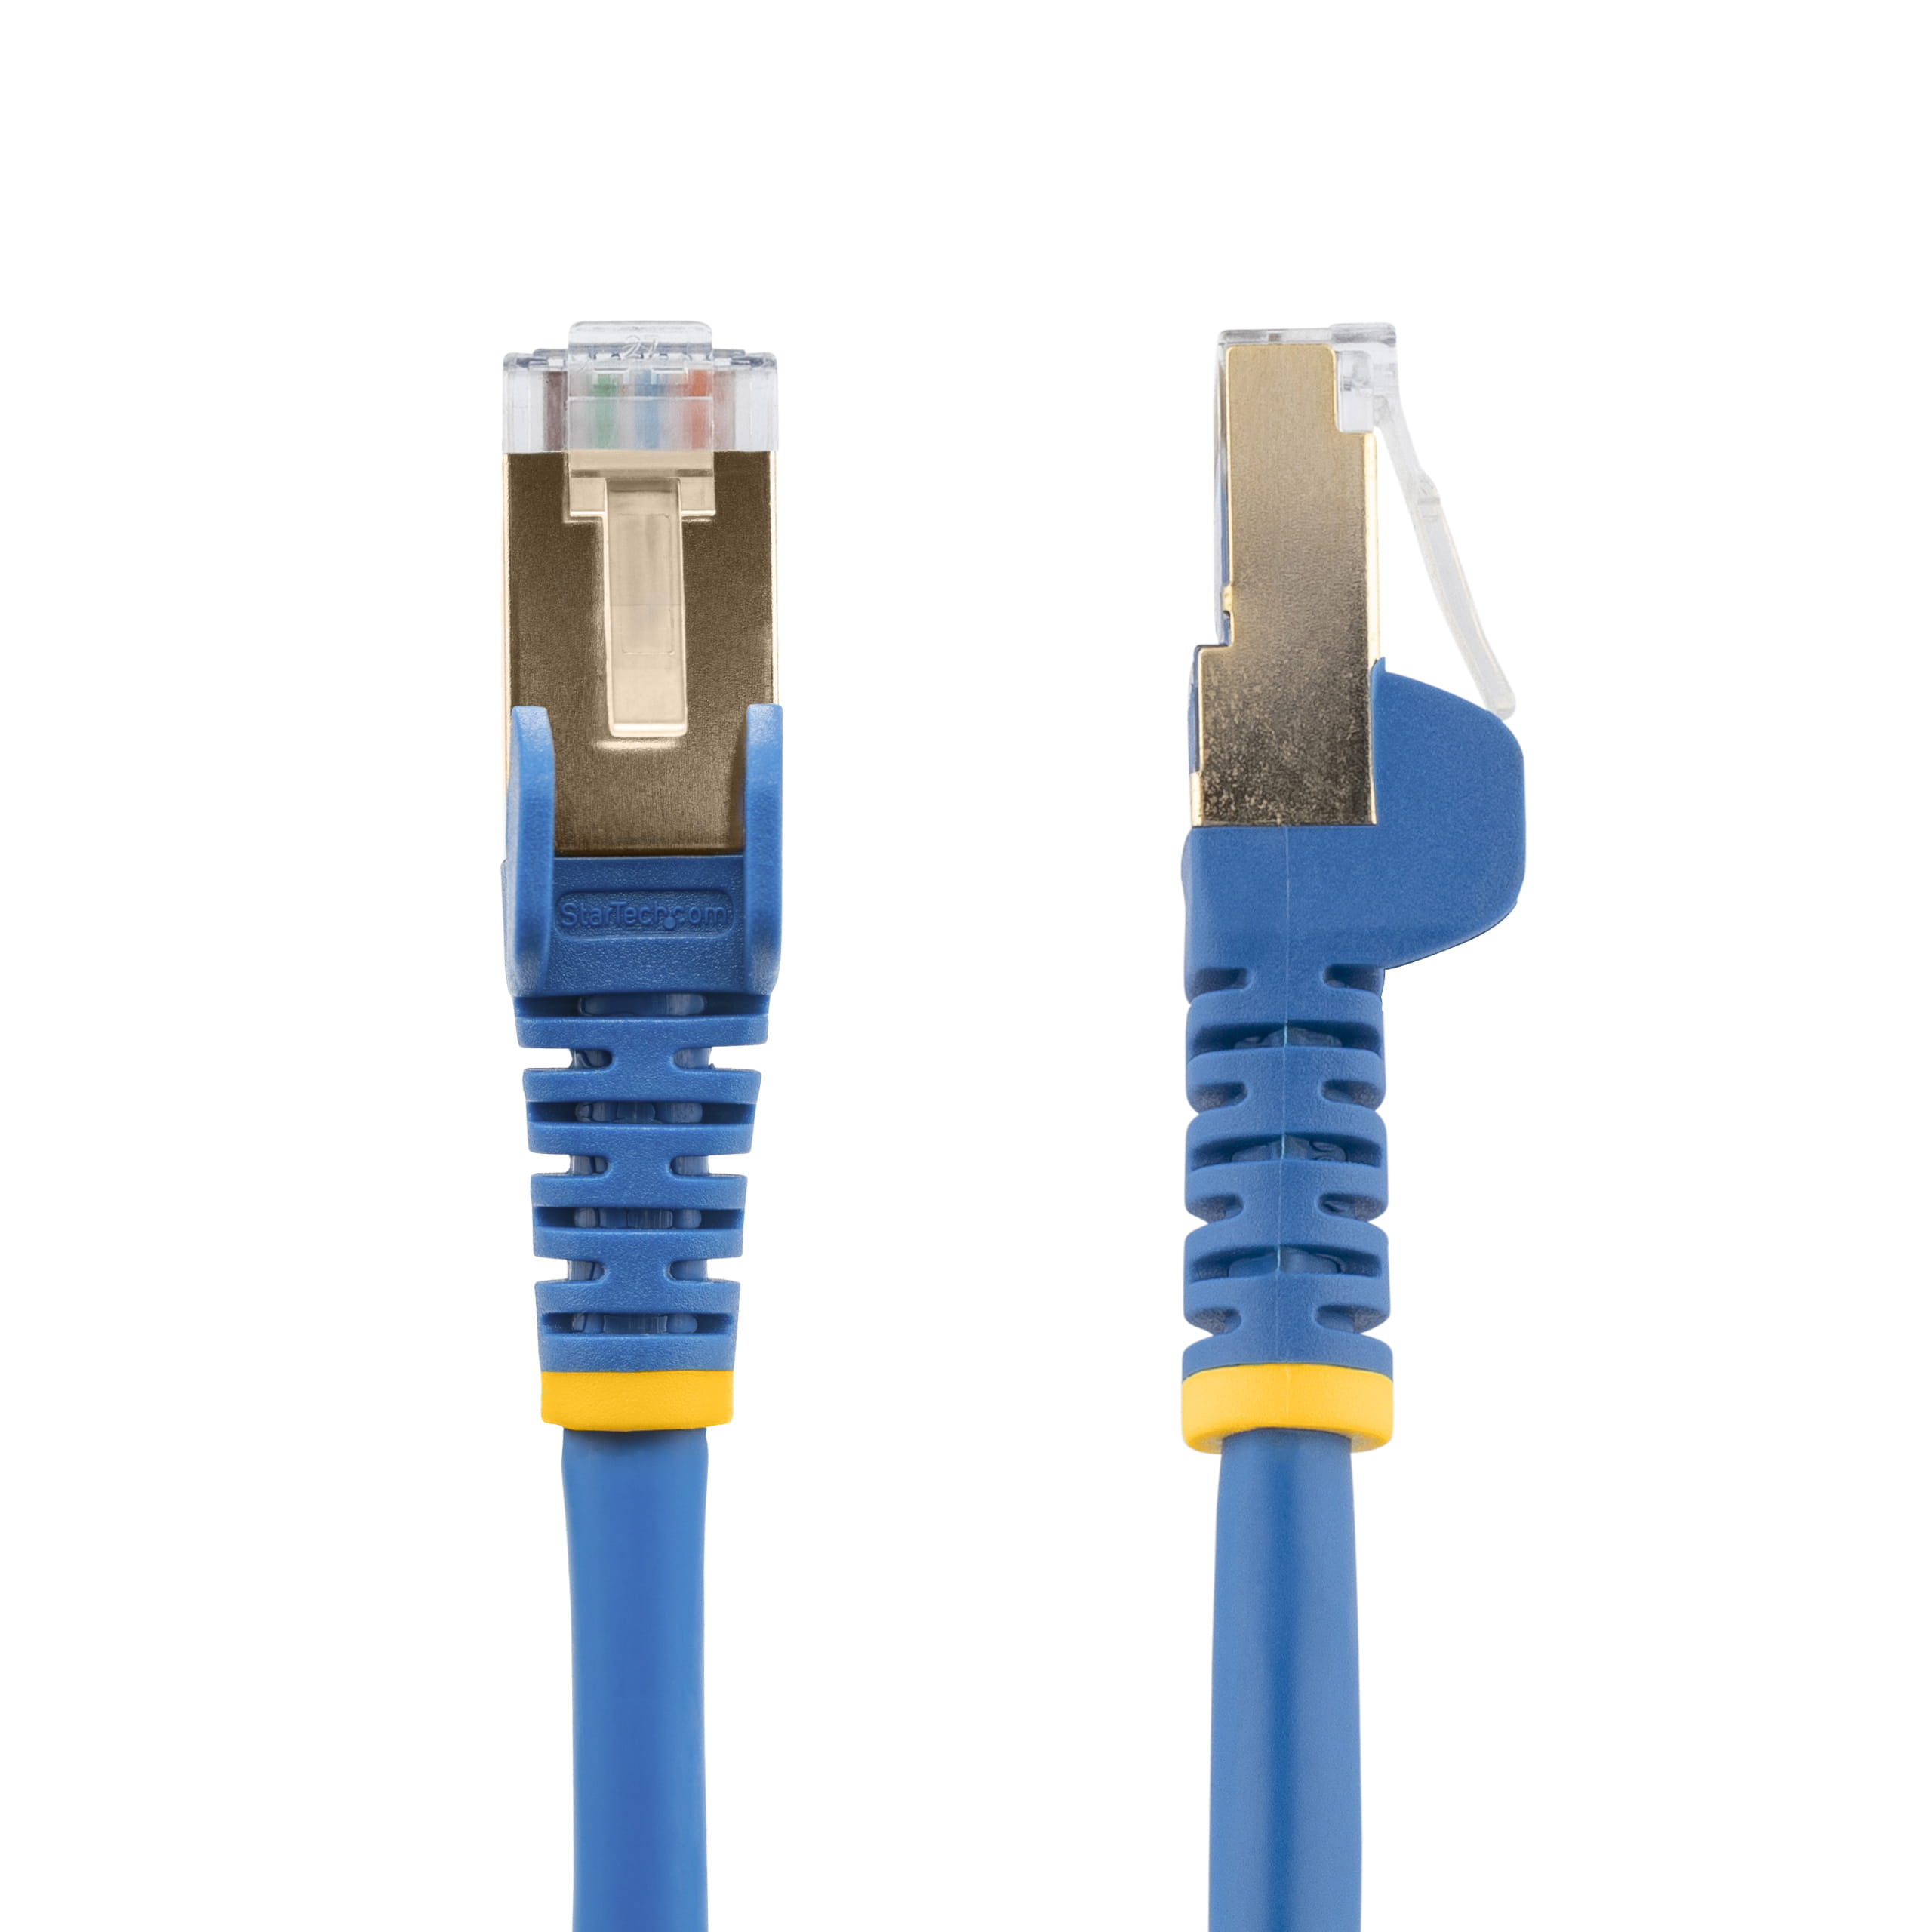 StarTech.com 50cm CAT6A Ethernet Cable, 10 Gigabit Shielded Snagless RJ45 100W PoE Patch Cord, CAT 6A 10GbE STP Network Cable w/Strain Relief, Blue, Fluke Tested/UL Certified Wiring/TIA - Category 6A - 26AWG (6ASPAT50CMBL)